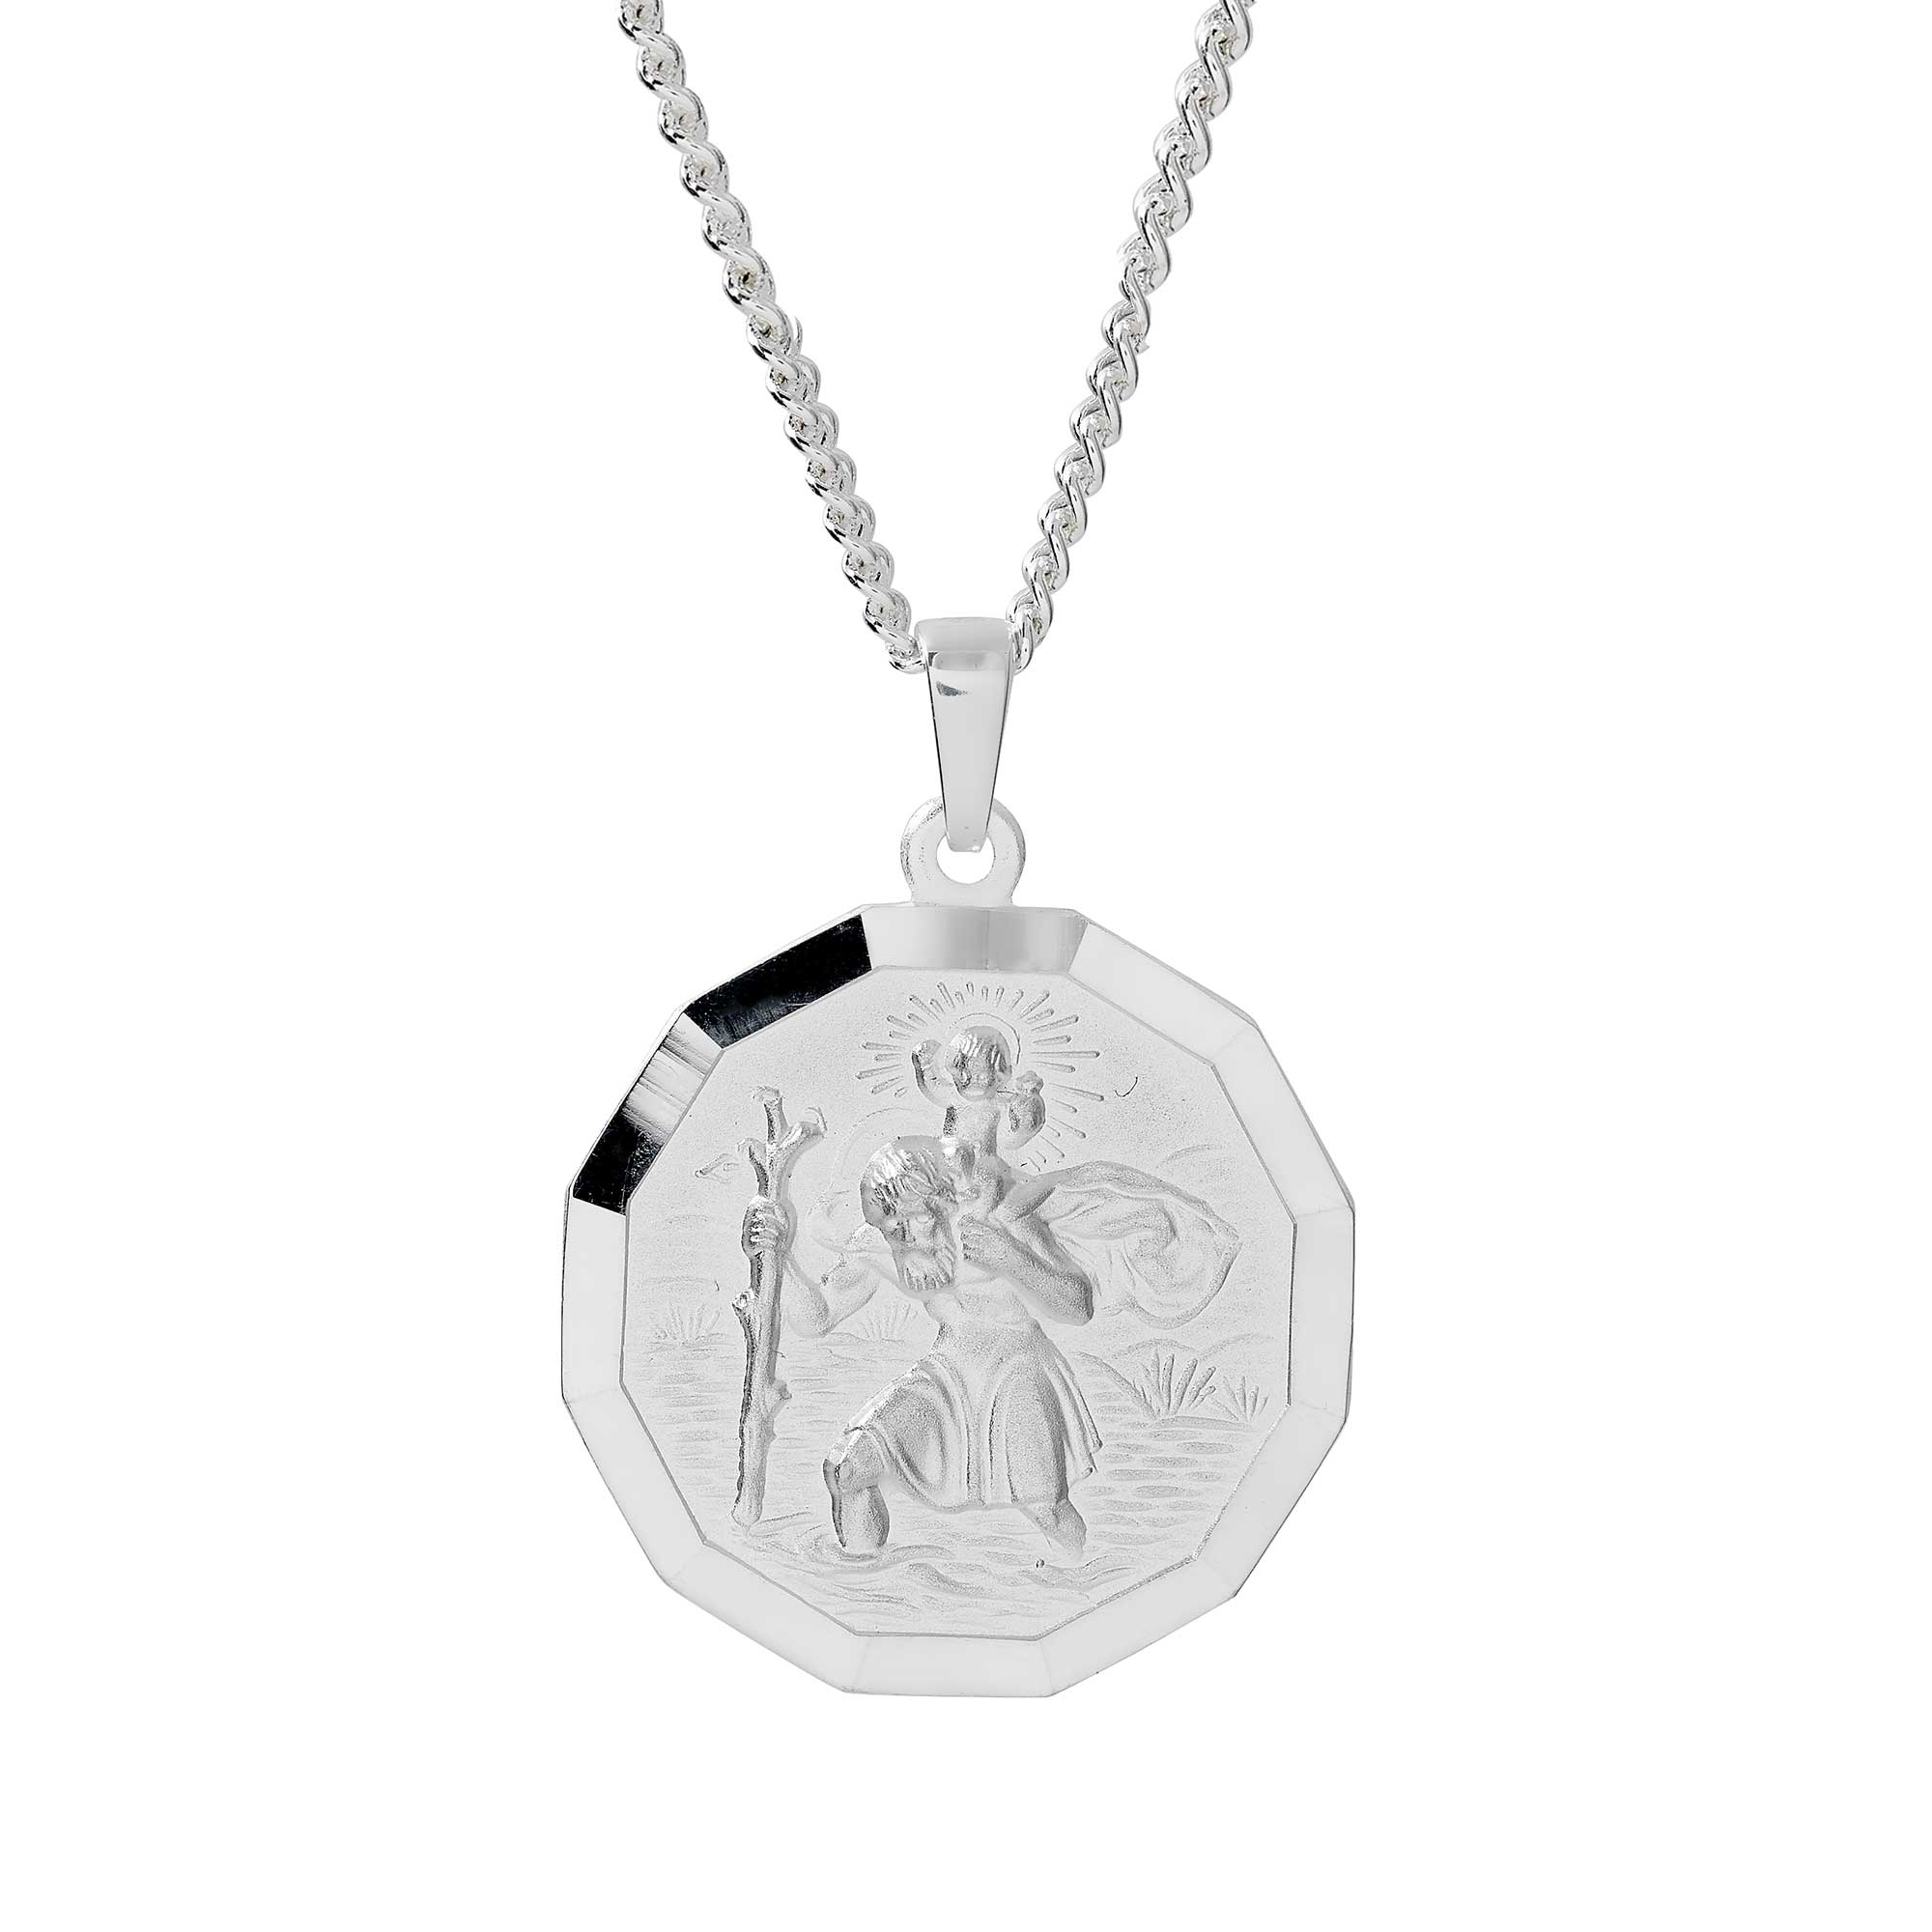 large silver 12 sided saint christopher necklace off the map travel jewelry for men